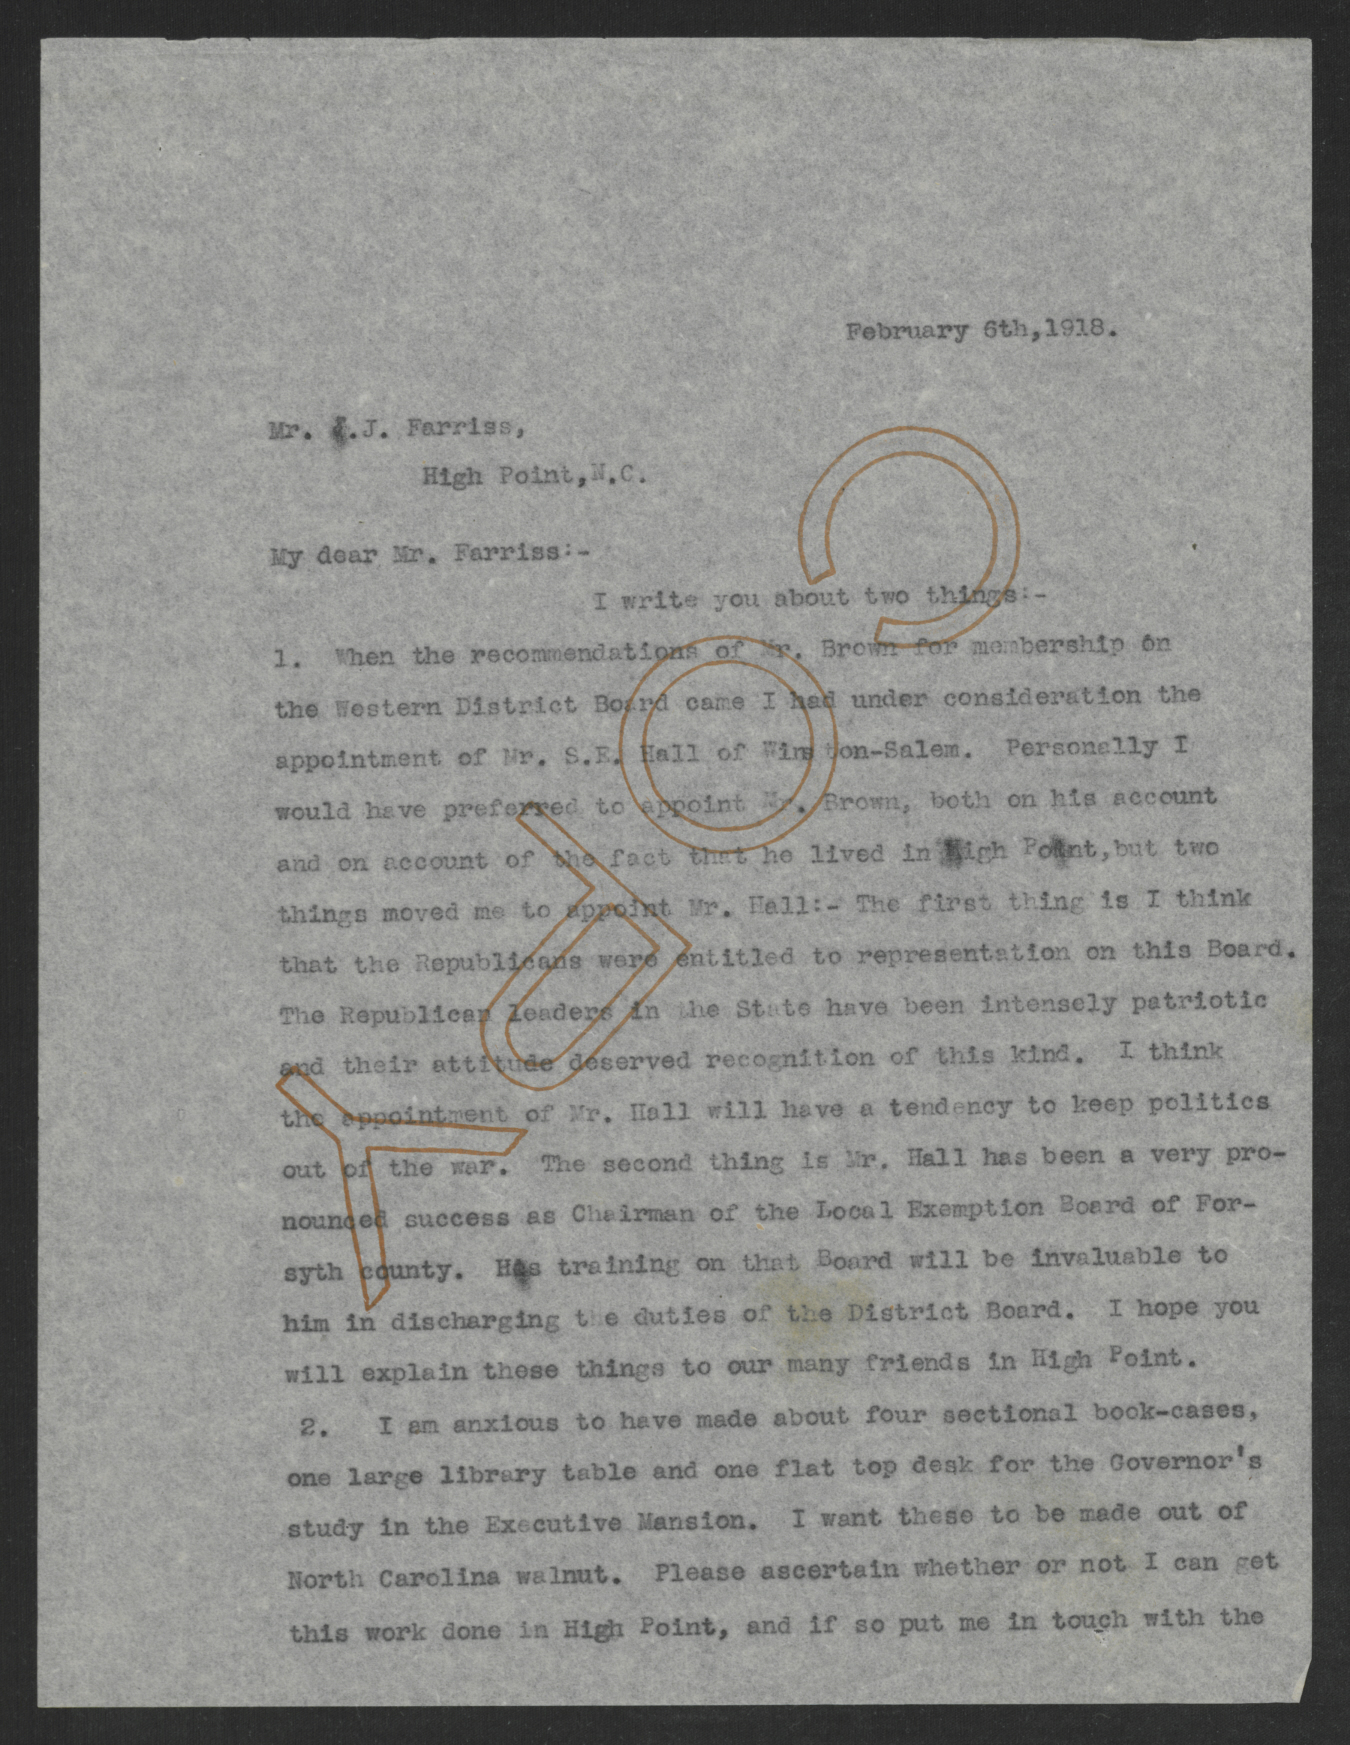 Letter from Thomas W. Bickett to Joseph J. Farriss, February 6, 1918, page 1